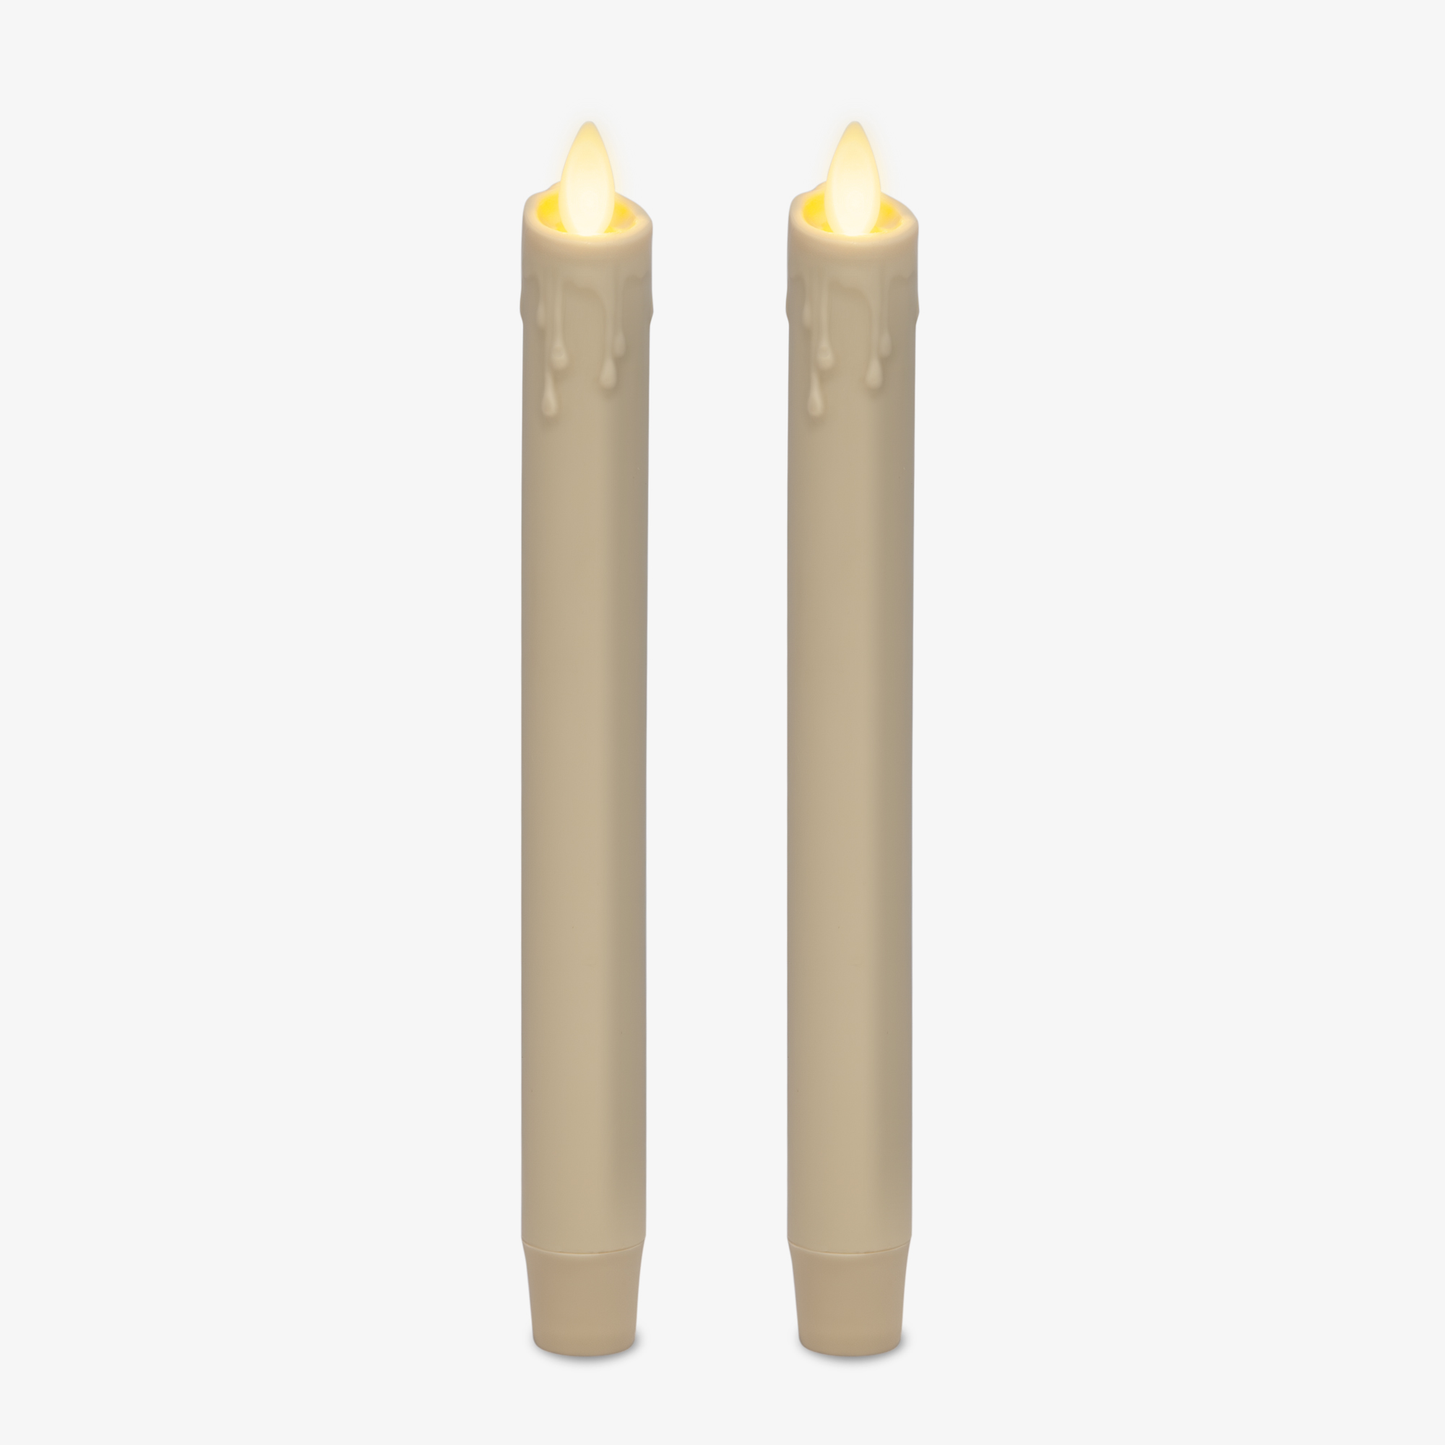 Set of 2 Ivory Wax Drip Flameless Candle Tapers - Scallop Top